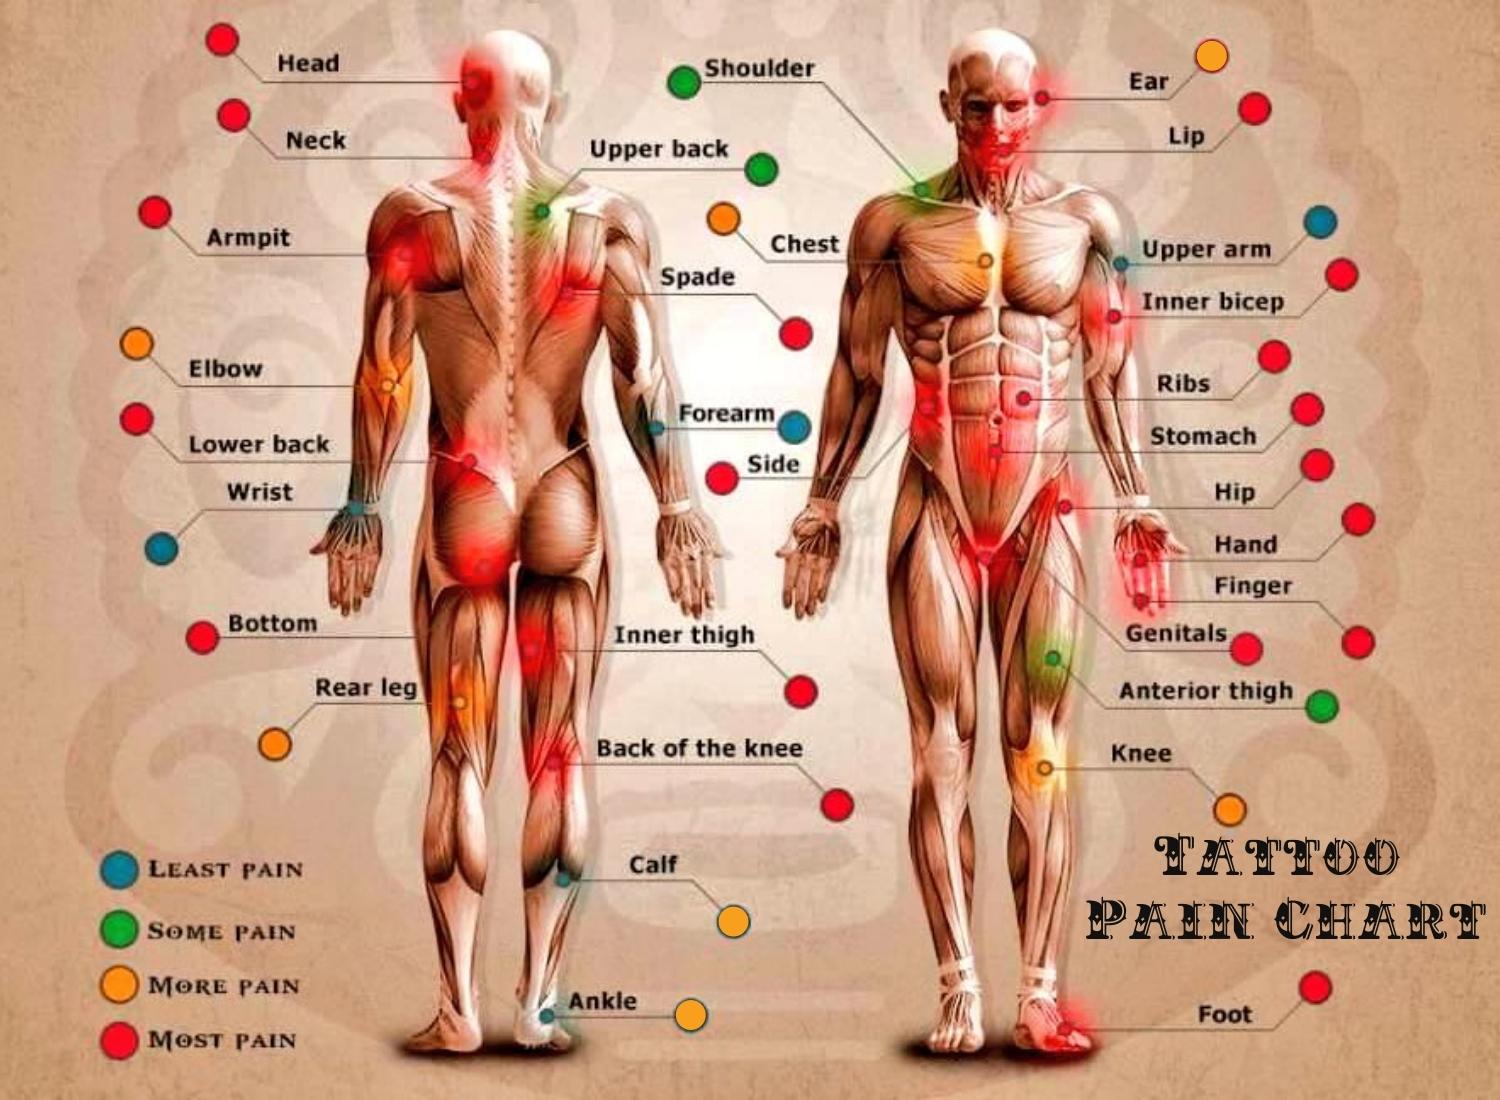 Tattoo Placement Chart